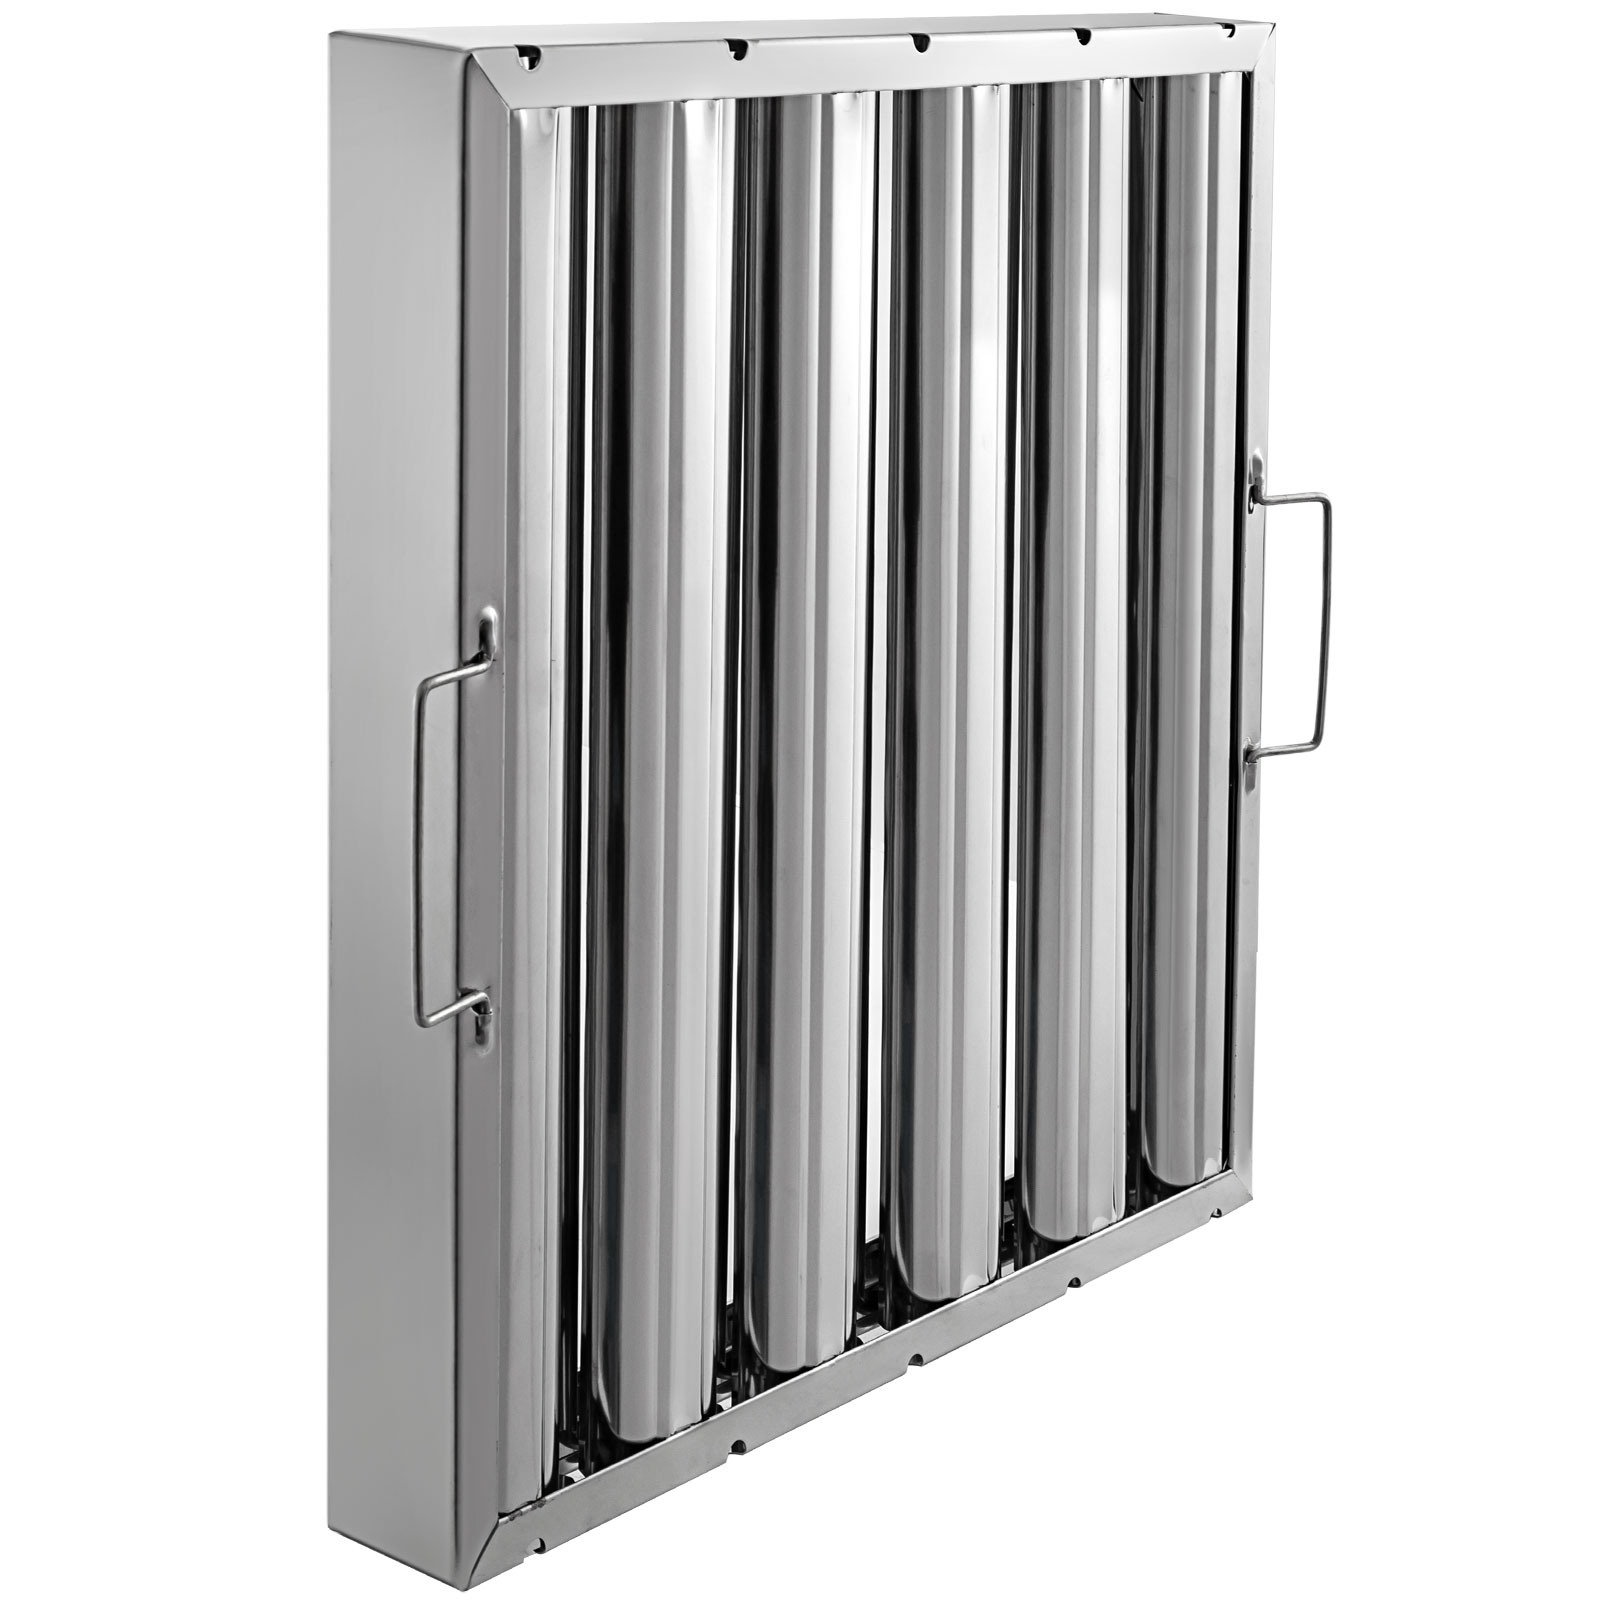 Details about   6-Serv-Ware Stainless Steel Baffle Filter-16" x 25"-F1625S-Hood-Grease 